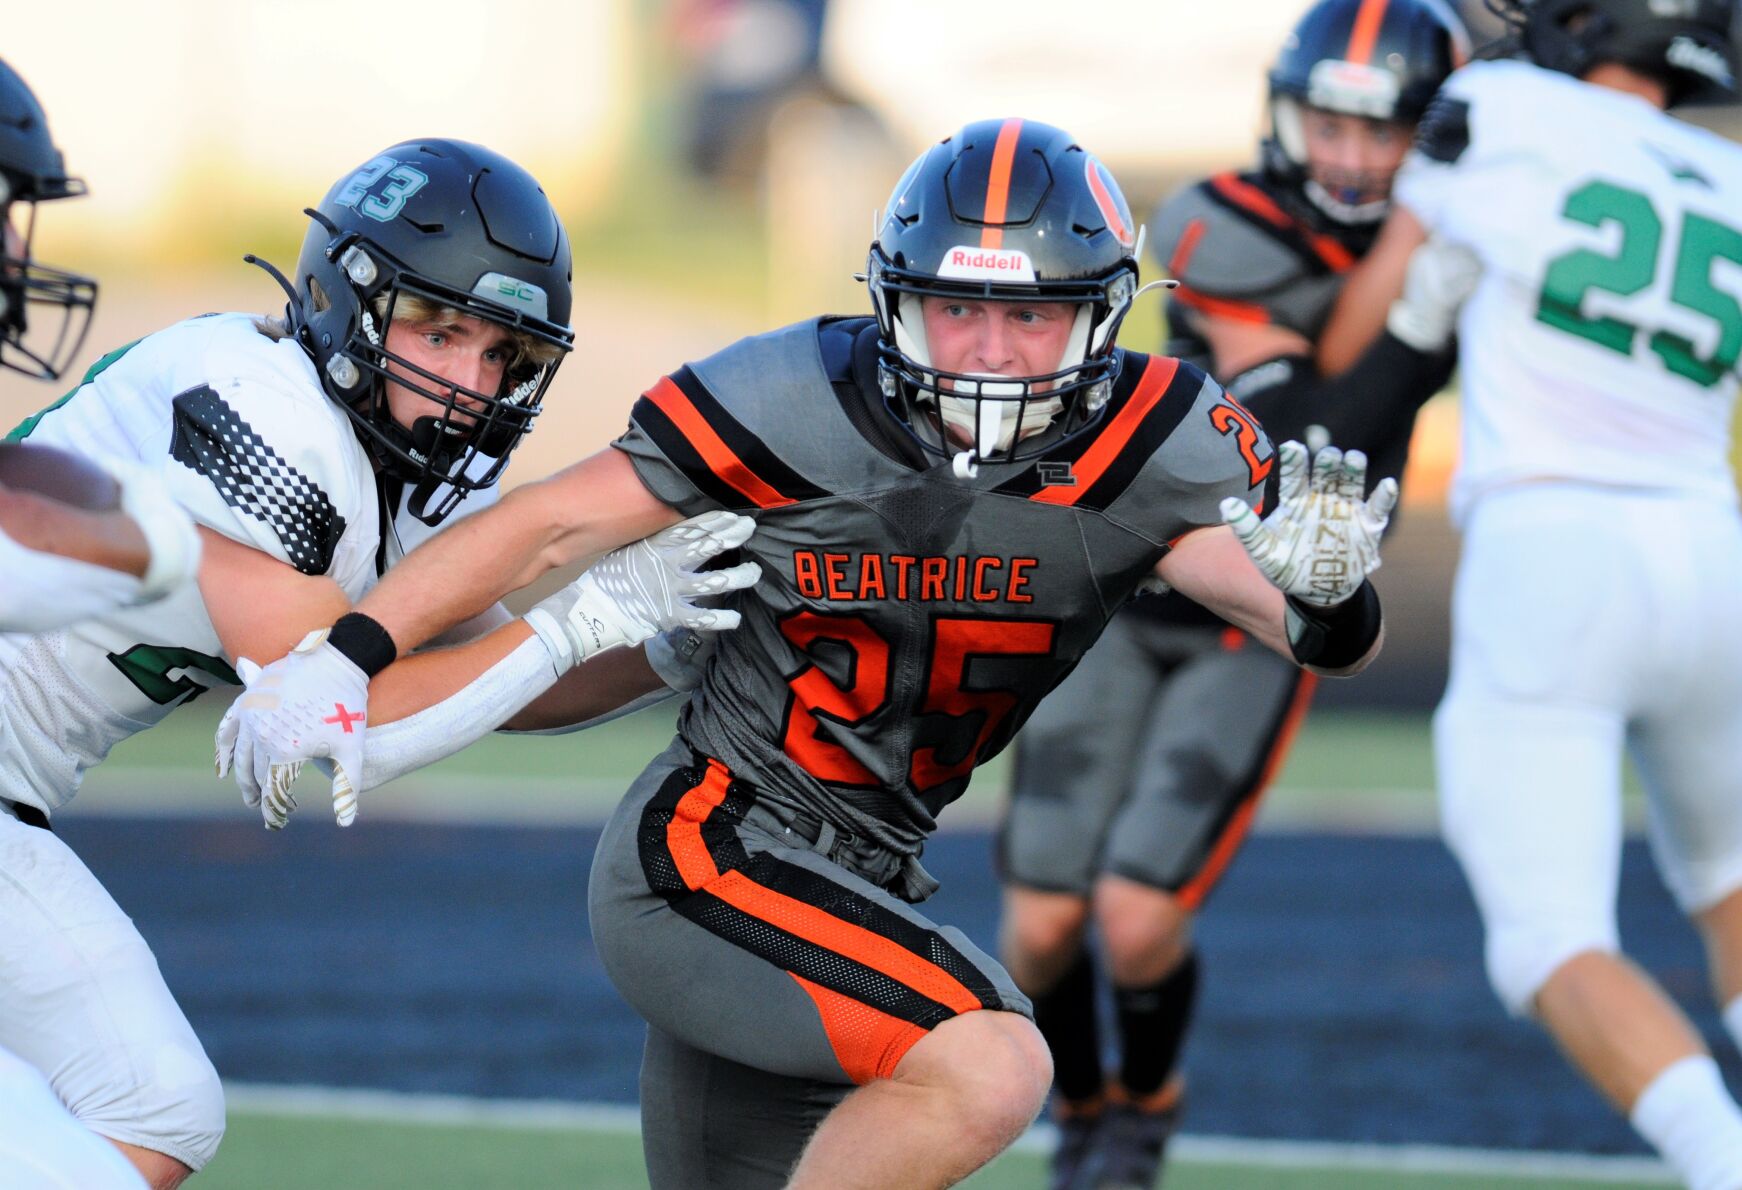 Beatrice football team suffers a 57-10 defeat against No. 3 Omaha Skutt but shows promise with standout performances